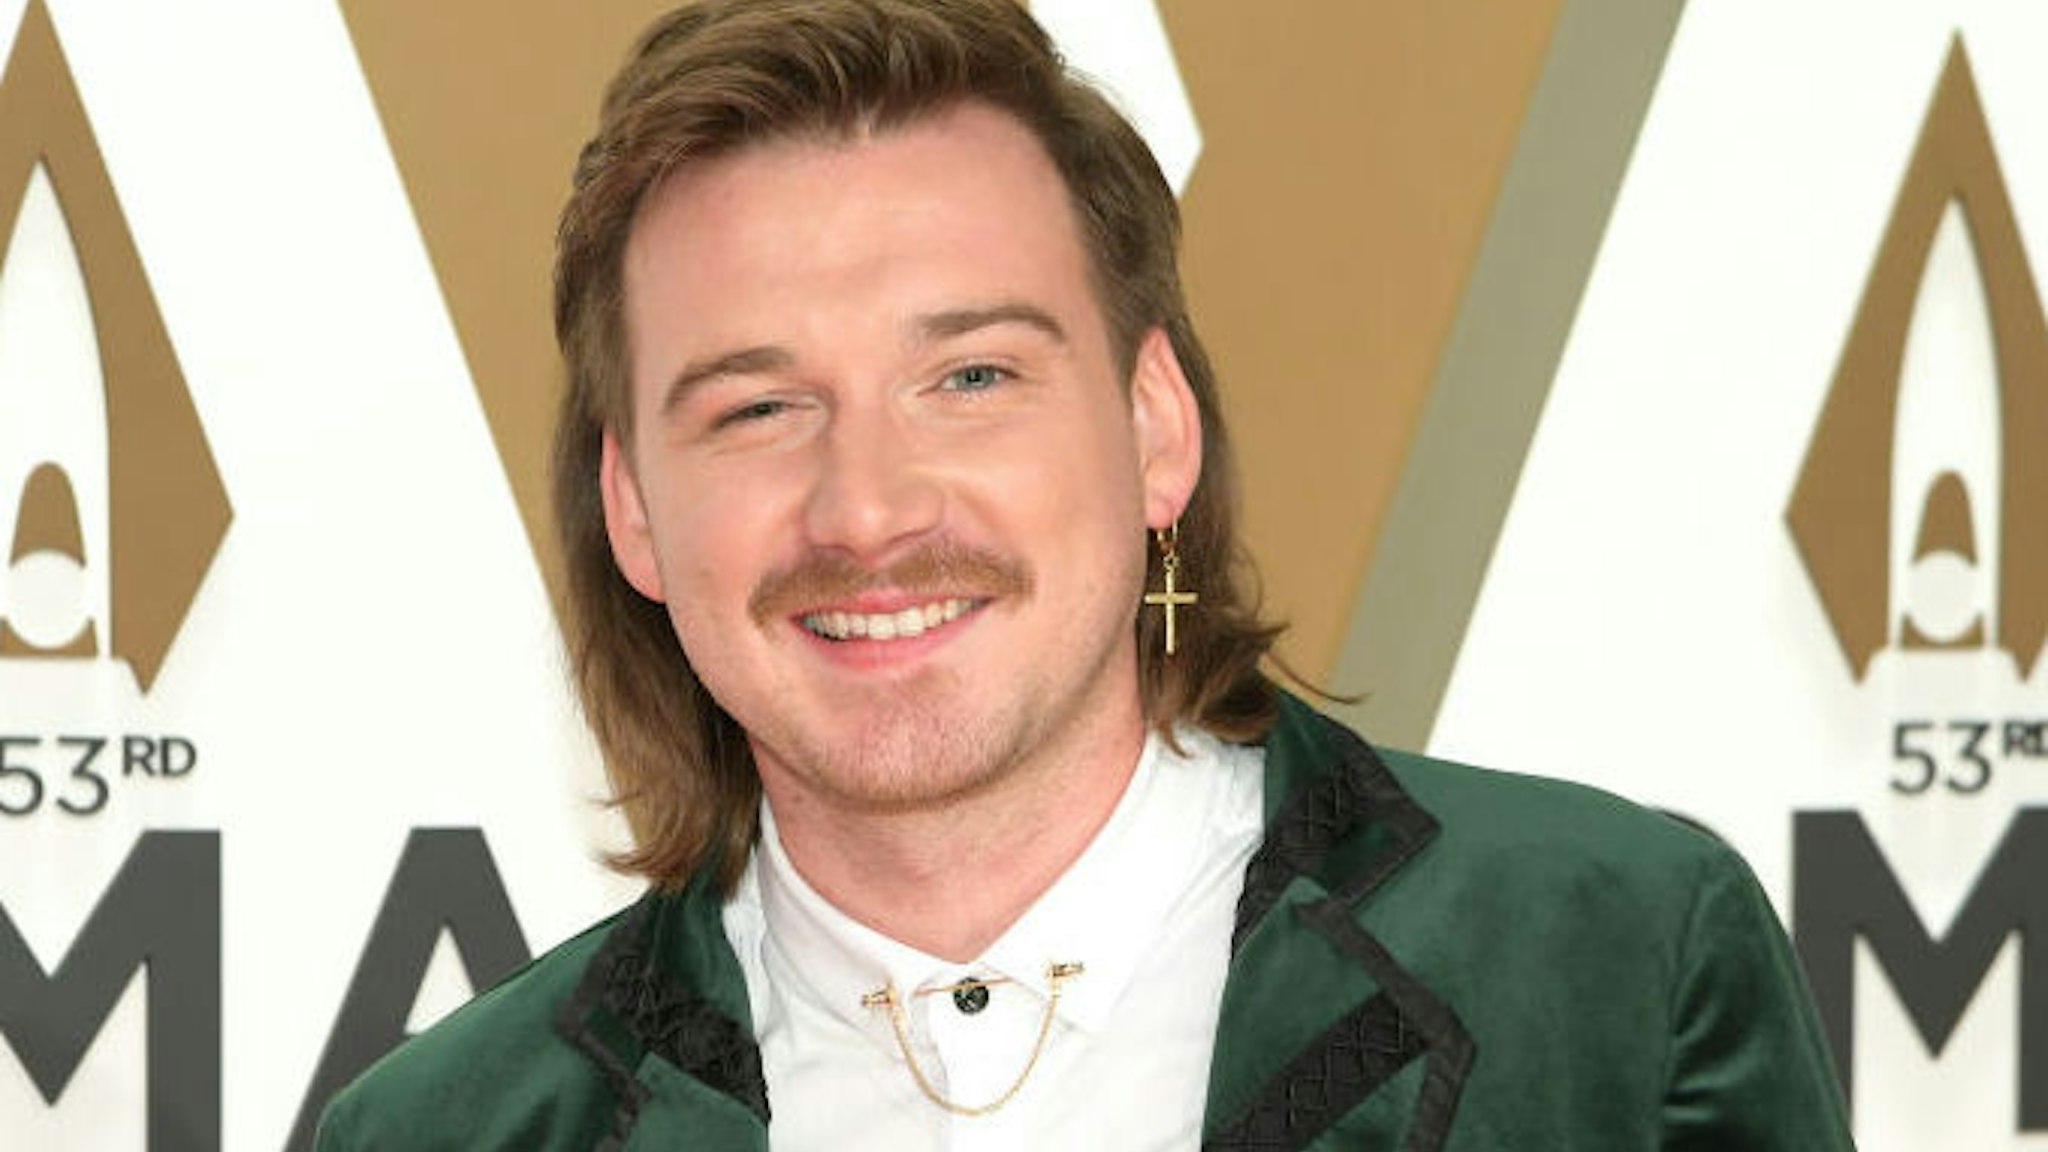 Morgan Wallen attends the 53rd annual CMA Awards at the Music City Center on November 13, 2019 in Nashville, Tennessee.